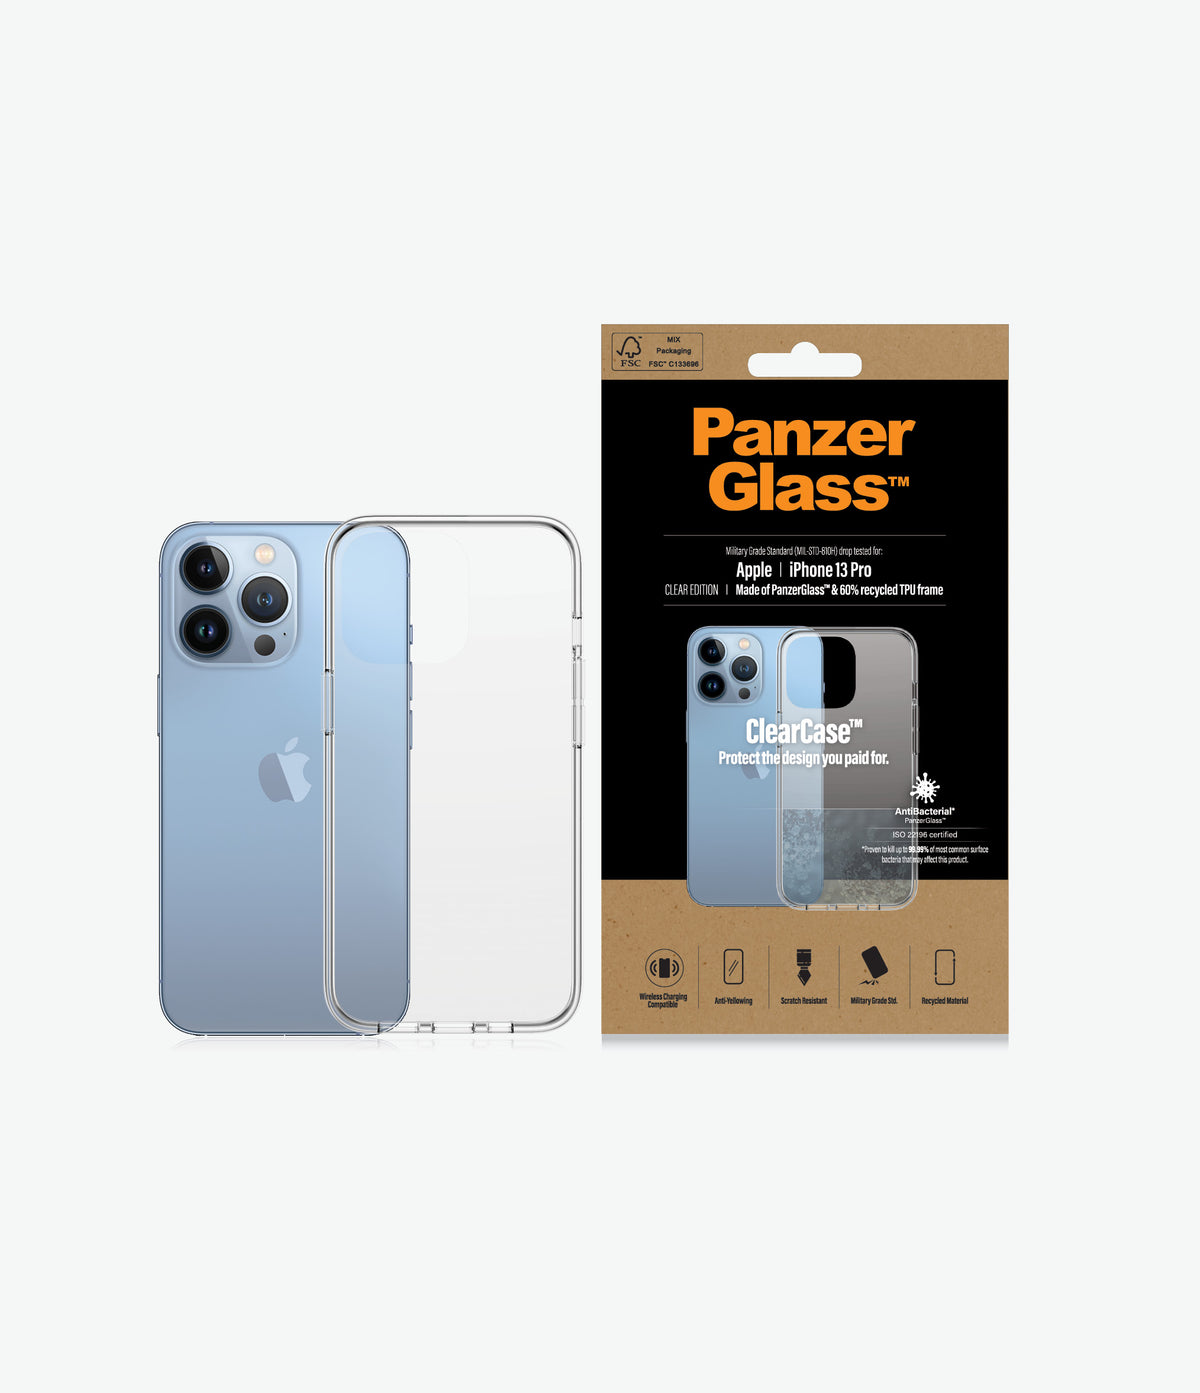 PANZERGLASS iPhone 13 Pro - Clear Case Drop Protection Treated w/Anti-Microbial